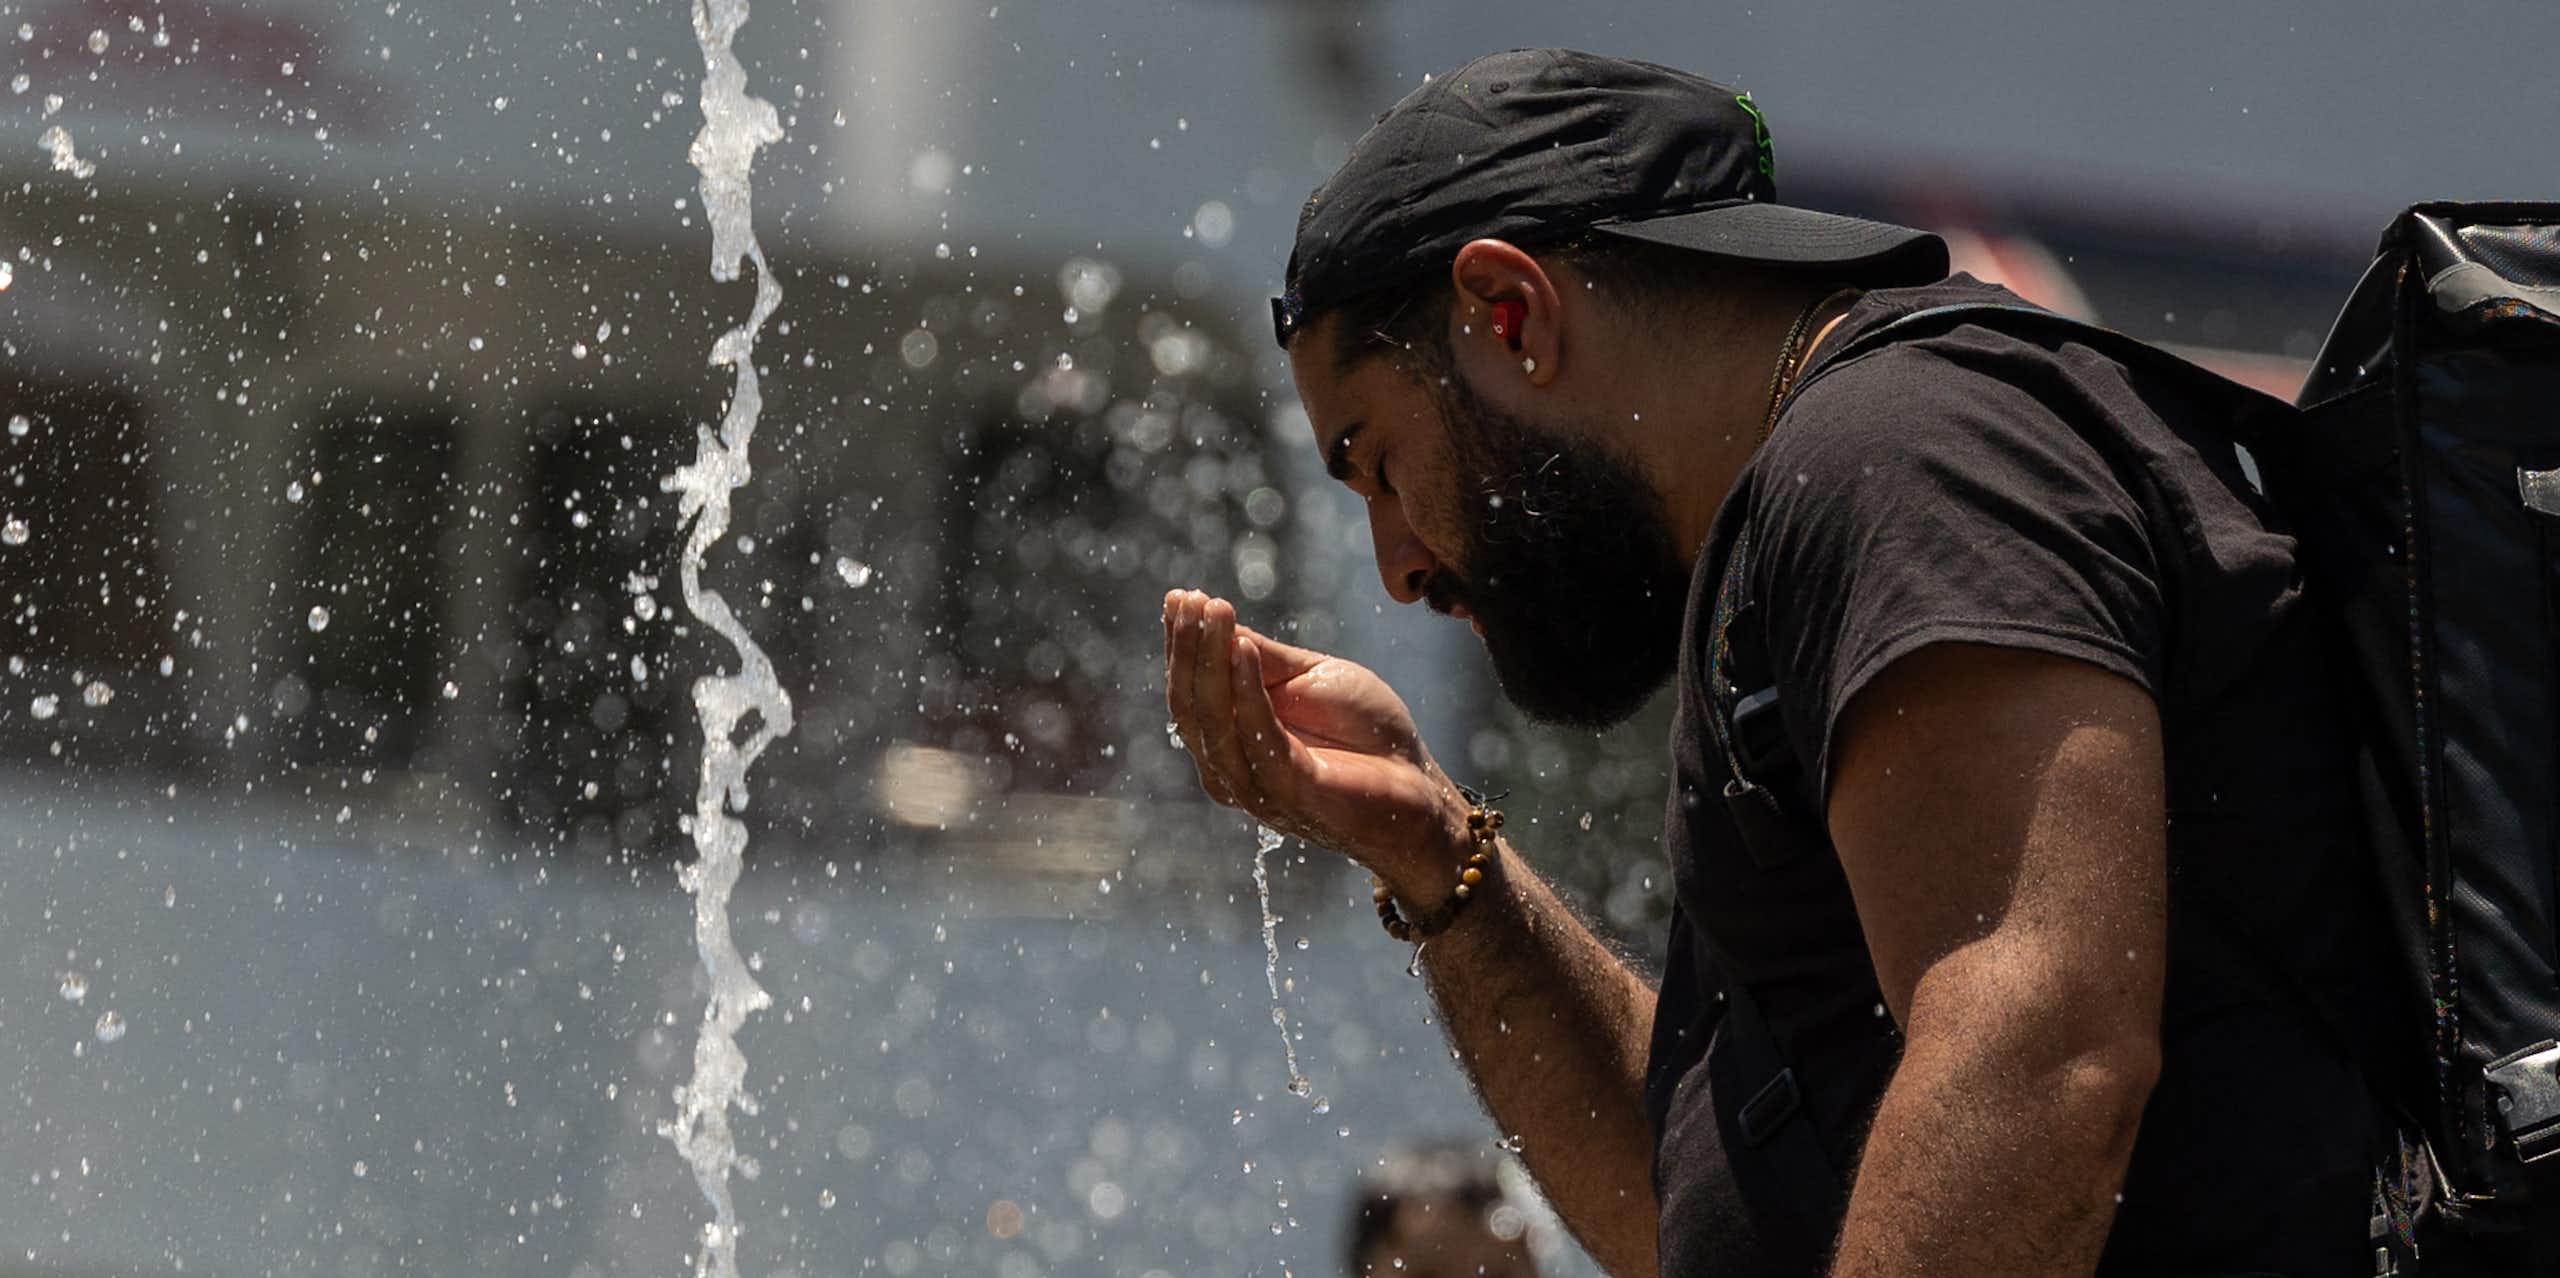 A man cools his face with water from a fountain while a boy splashes in the water behind him.